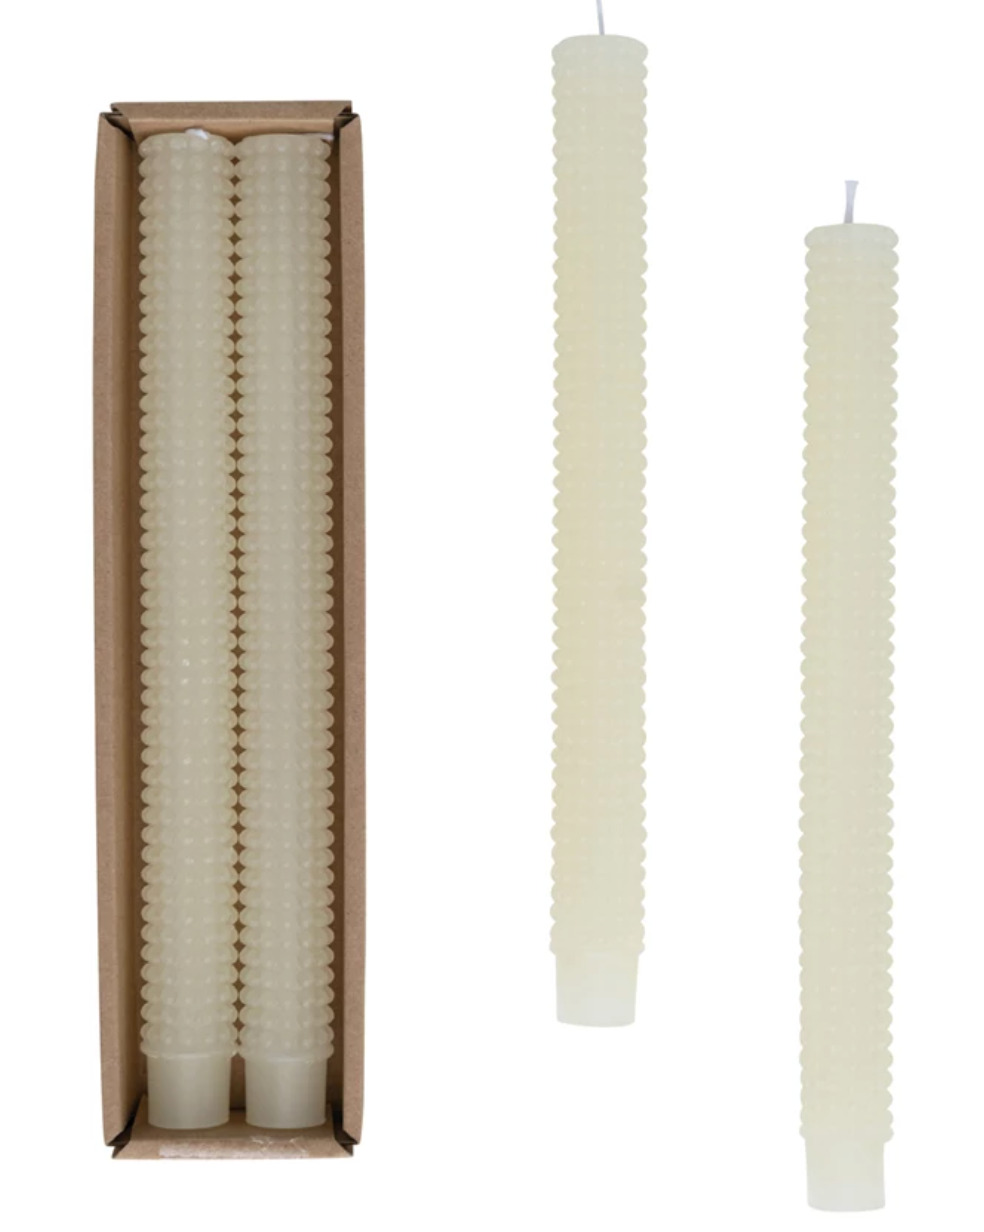 Unscented Hobnail Taper Candles in Box, Set of 2